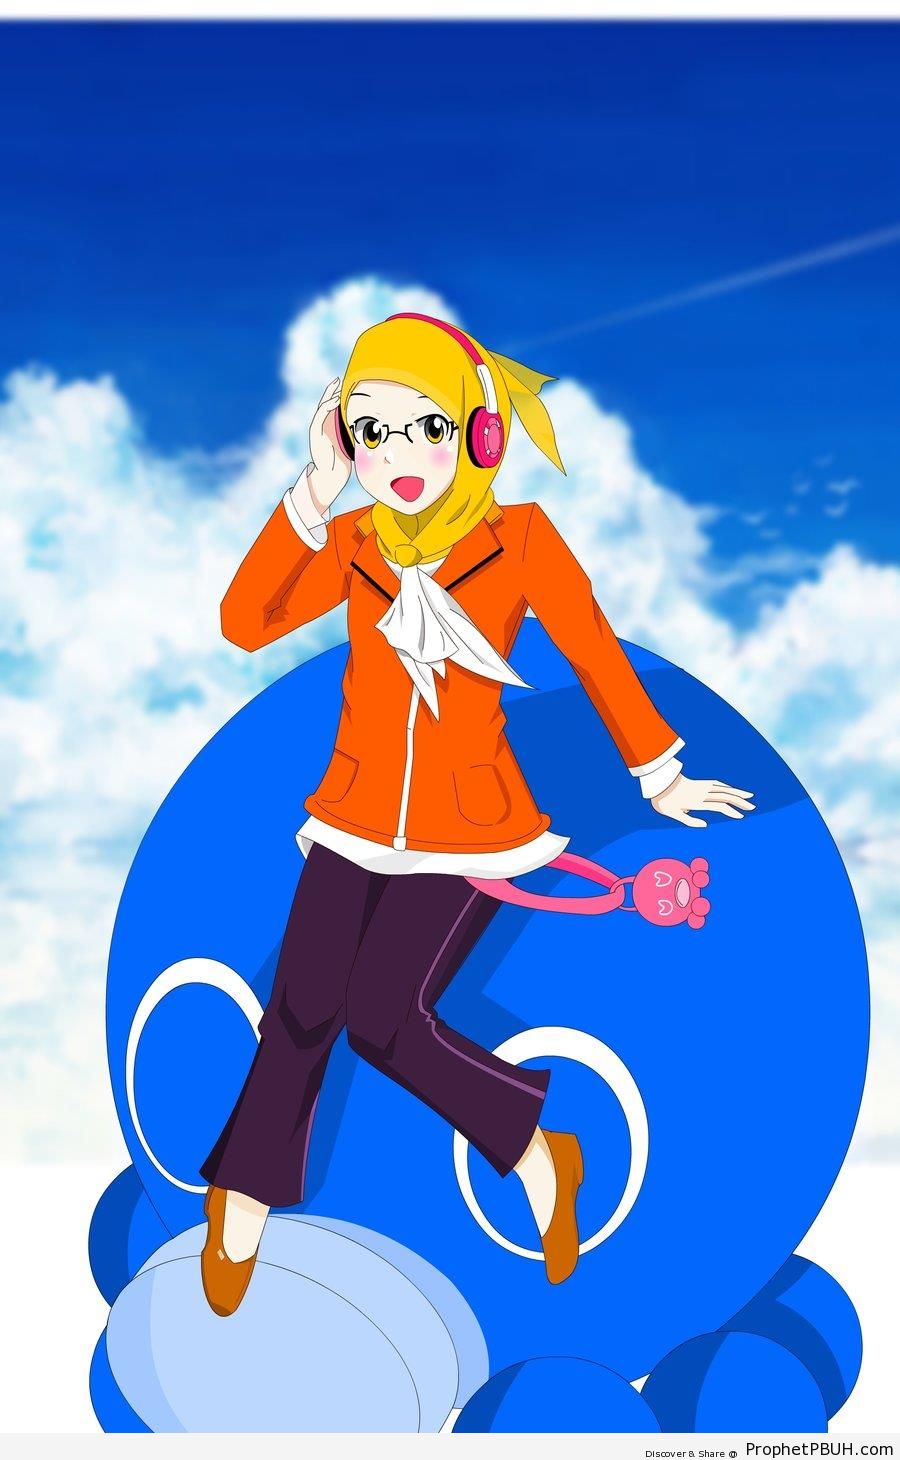 Glasses, Headphones, Yellow Hijab, and Orange Jacket in the Sky - Drawings 